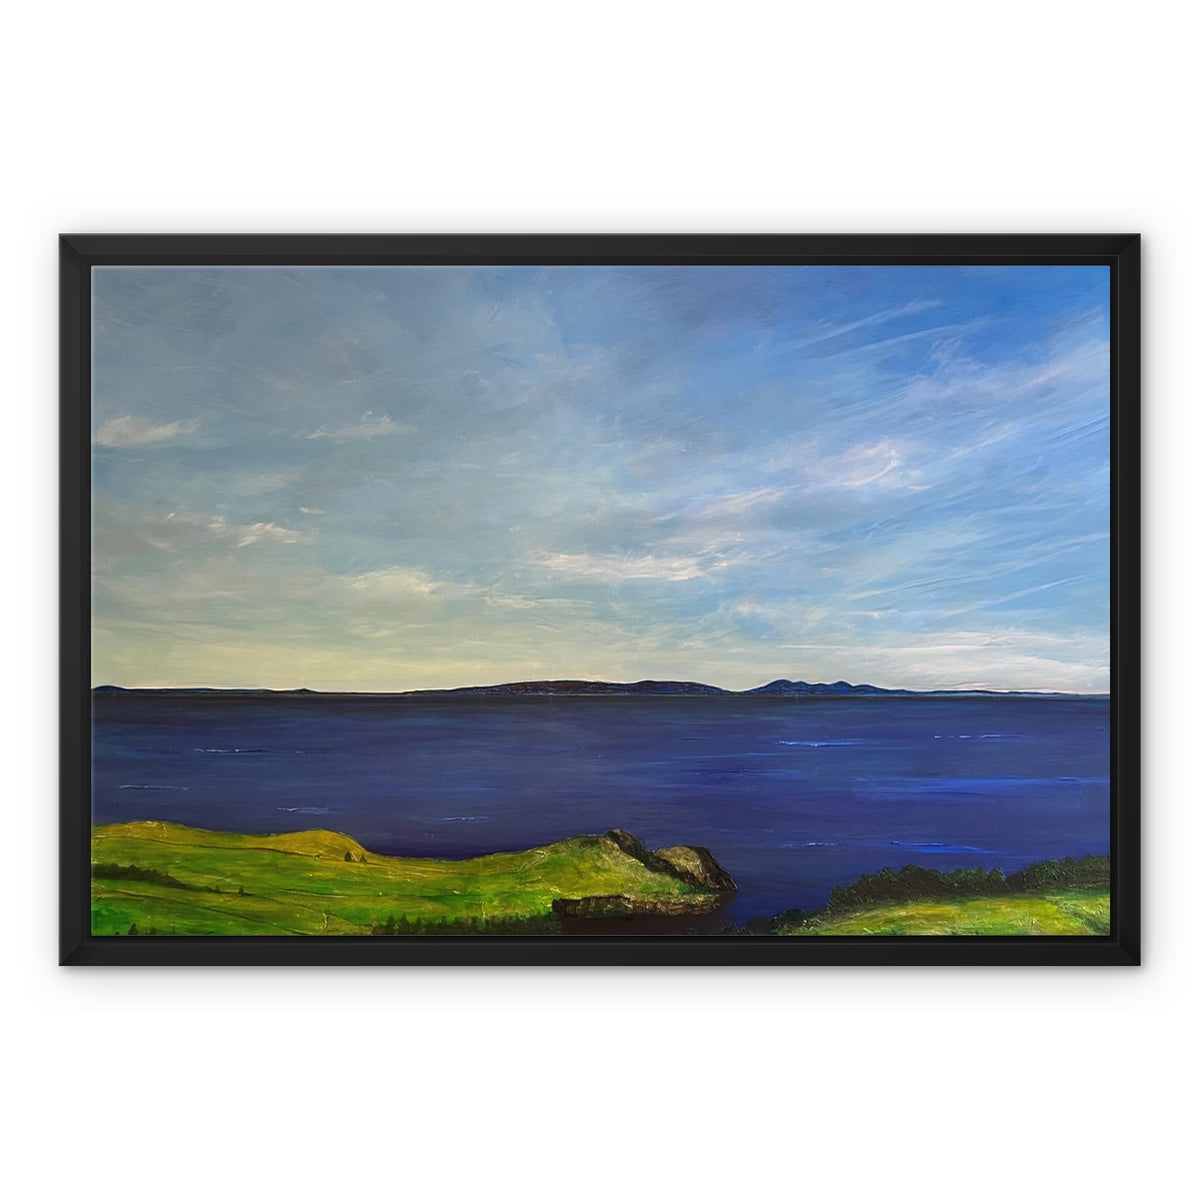 From Ireland To Scotland Painting | Framed Canvas From Scotland-Floating Framed Canvas Prints-World Art Gallery-24"x18"-Paintings, Prints, Homeware, Art Gifts From Scotland By Scottish Artist Kevin Hunter